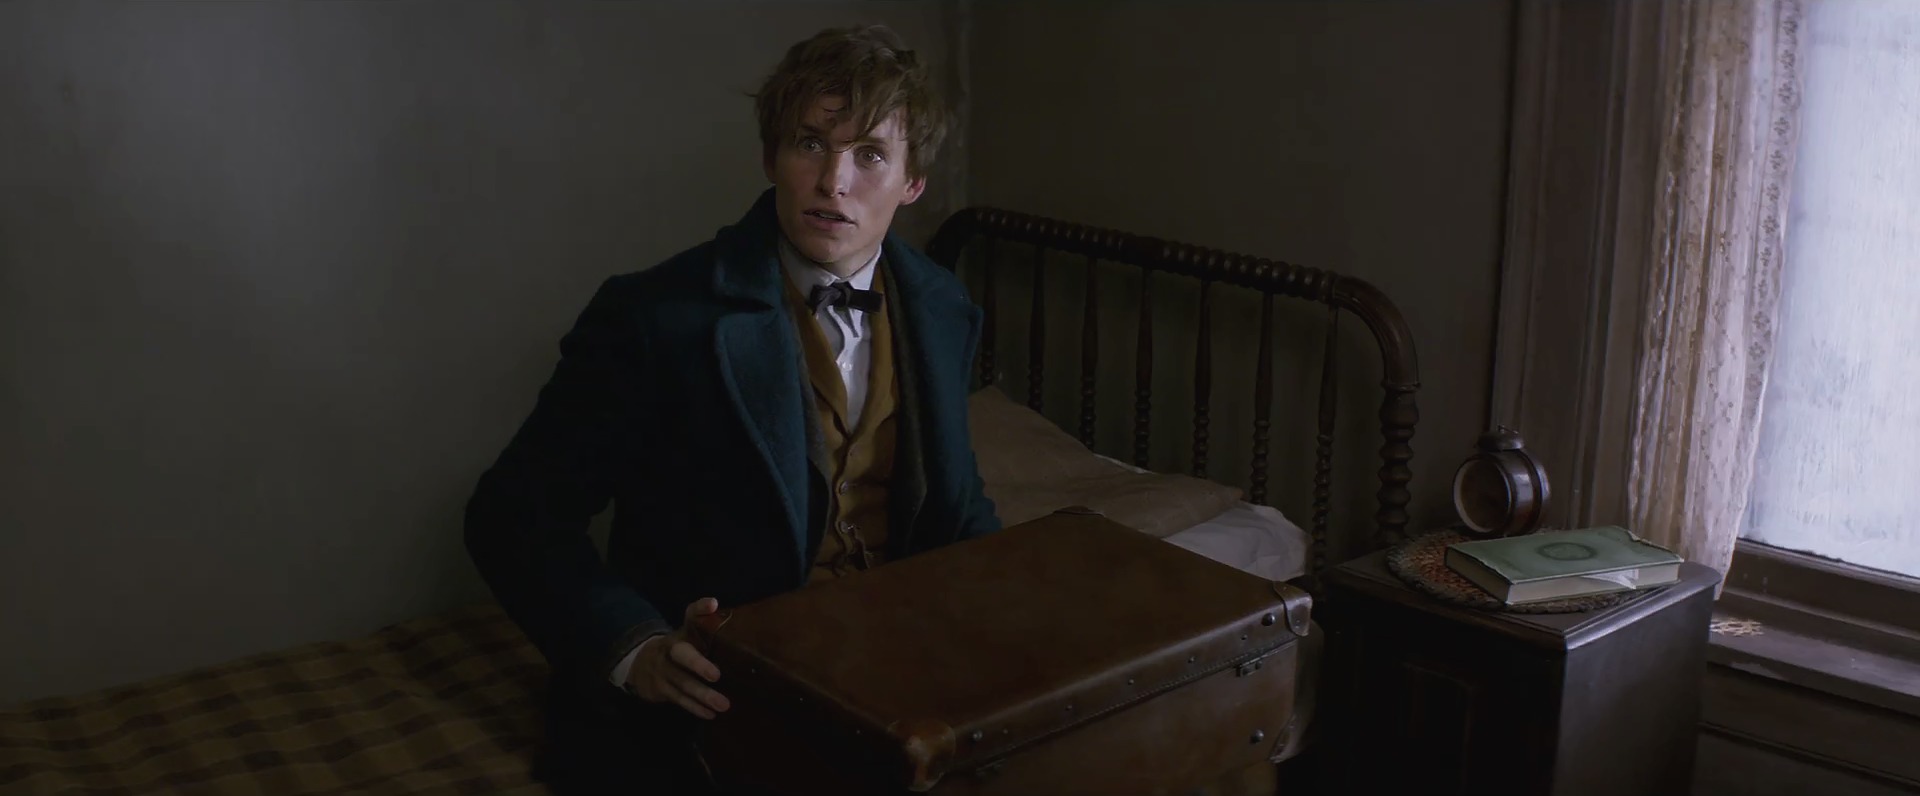 Online 1080P Watch 2016 Fantastic Beasts And Where To Find Them Film